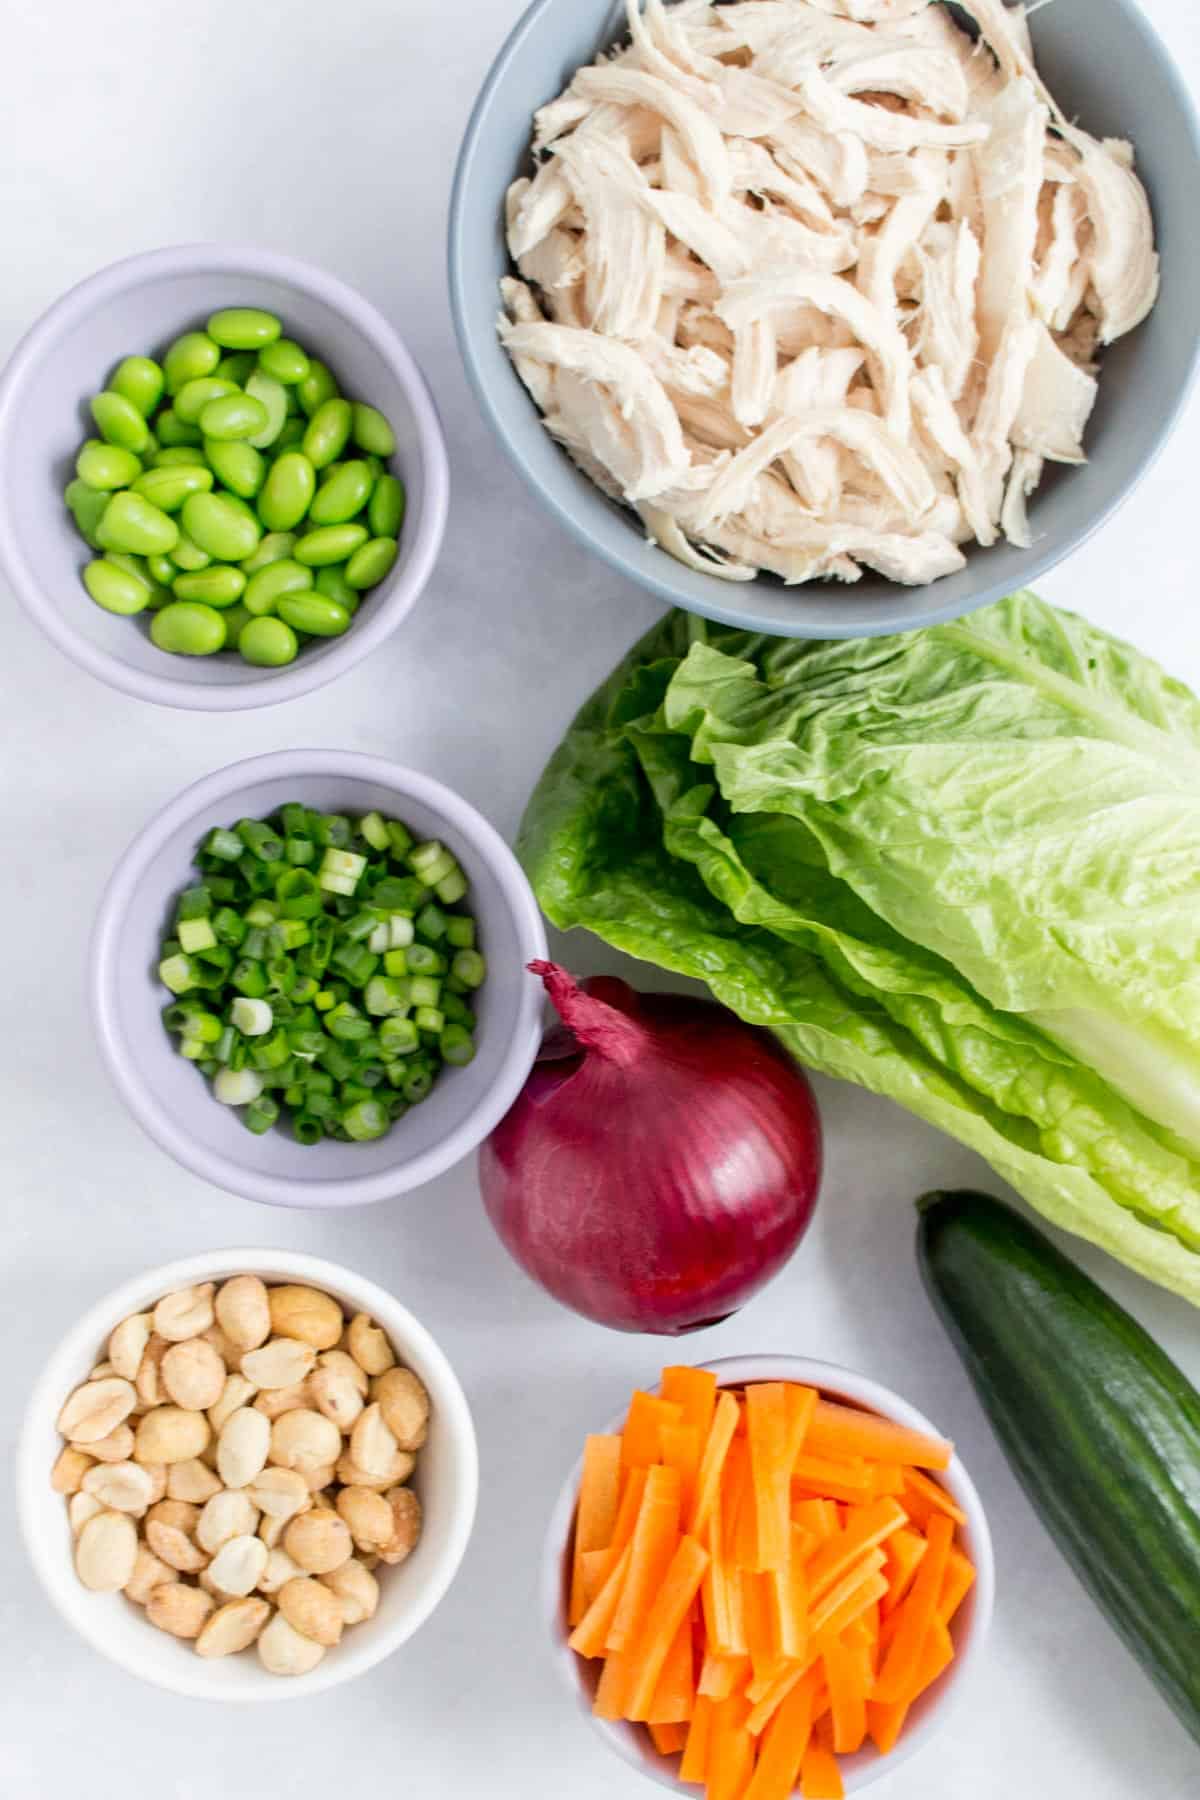 Ingredients needed for a chopped Asian salad.